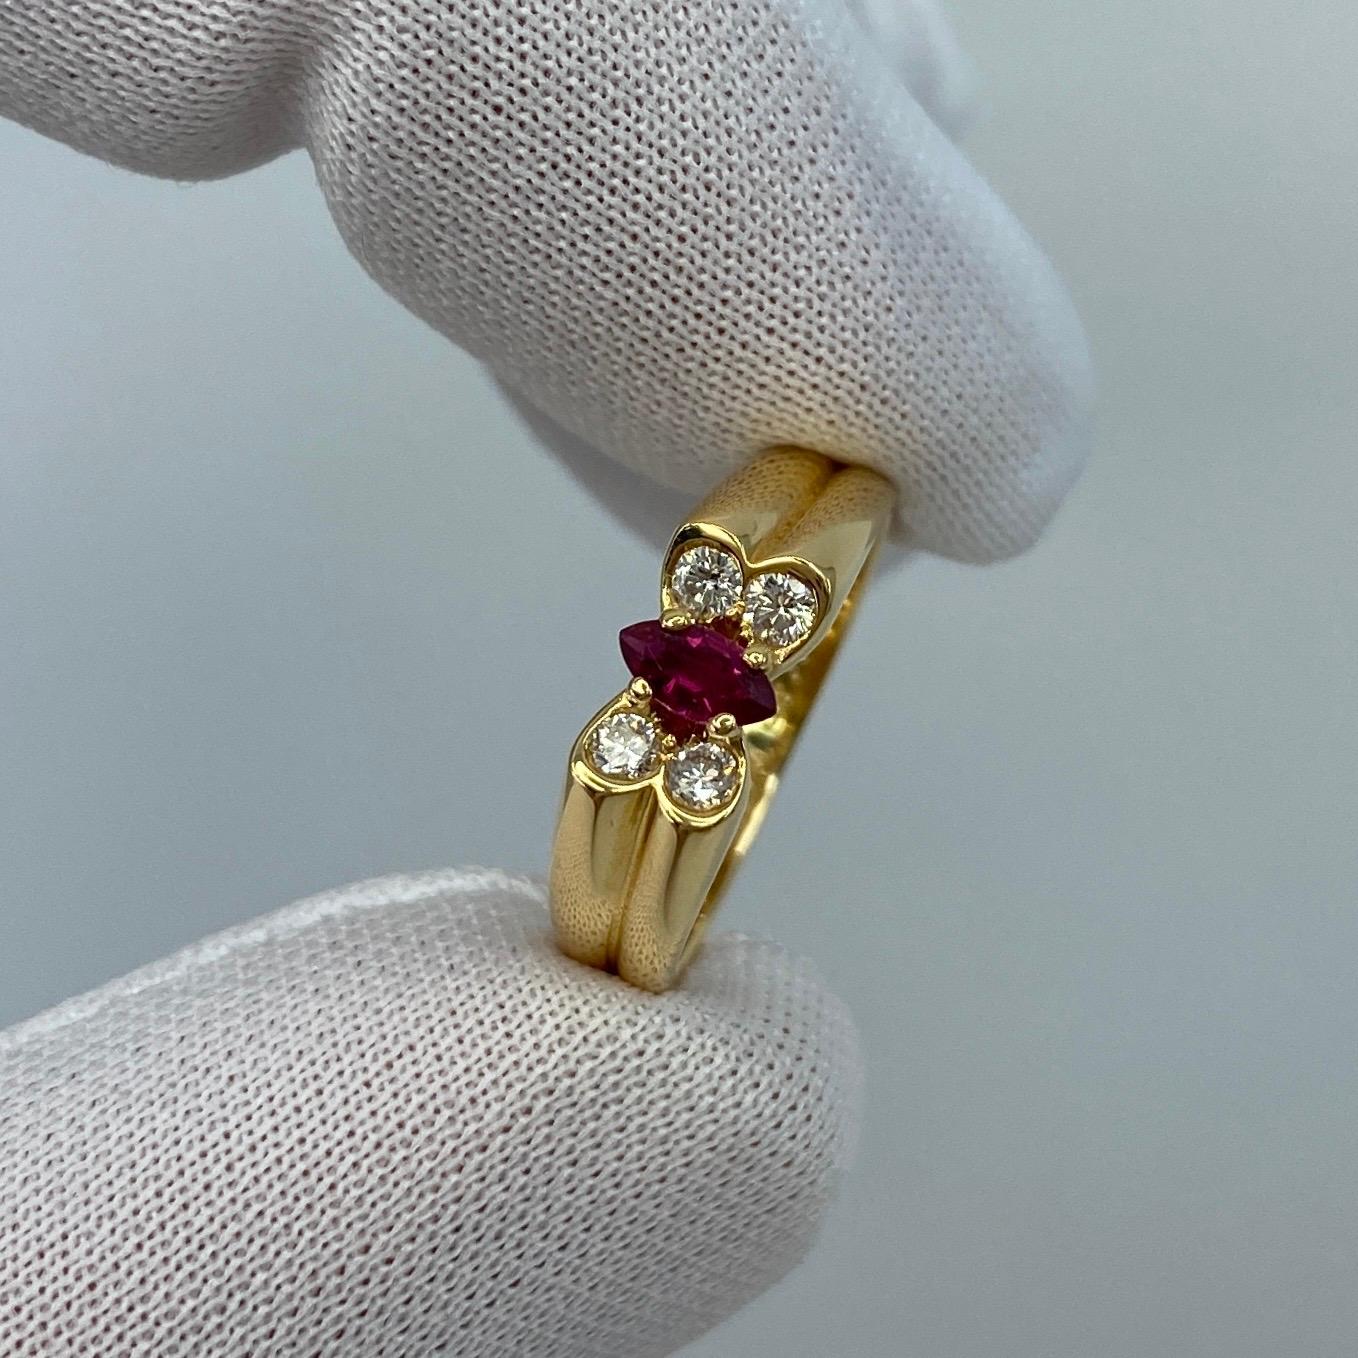 Vintage Van Cleef & Arpels Fine Ruby  & Diamond 18k Yellow Gold Ring

A stunning vintage ring with a unique design typical of Van Cleef & Arpels, set with a 0.33ct marquise/navette cut fine vivid red ruby & 4 excellent quality white diamonds.